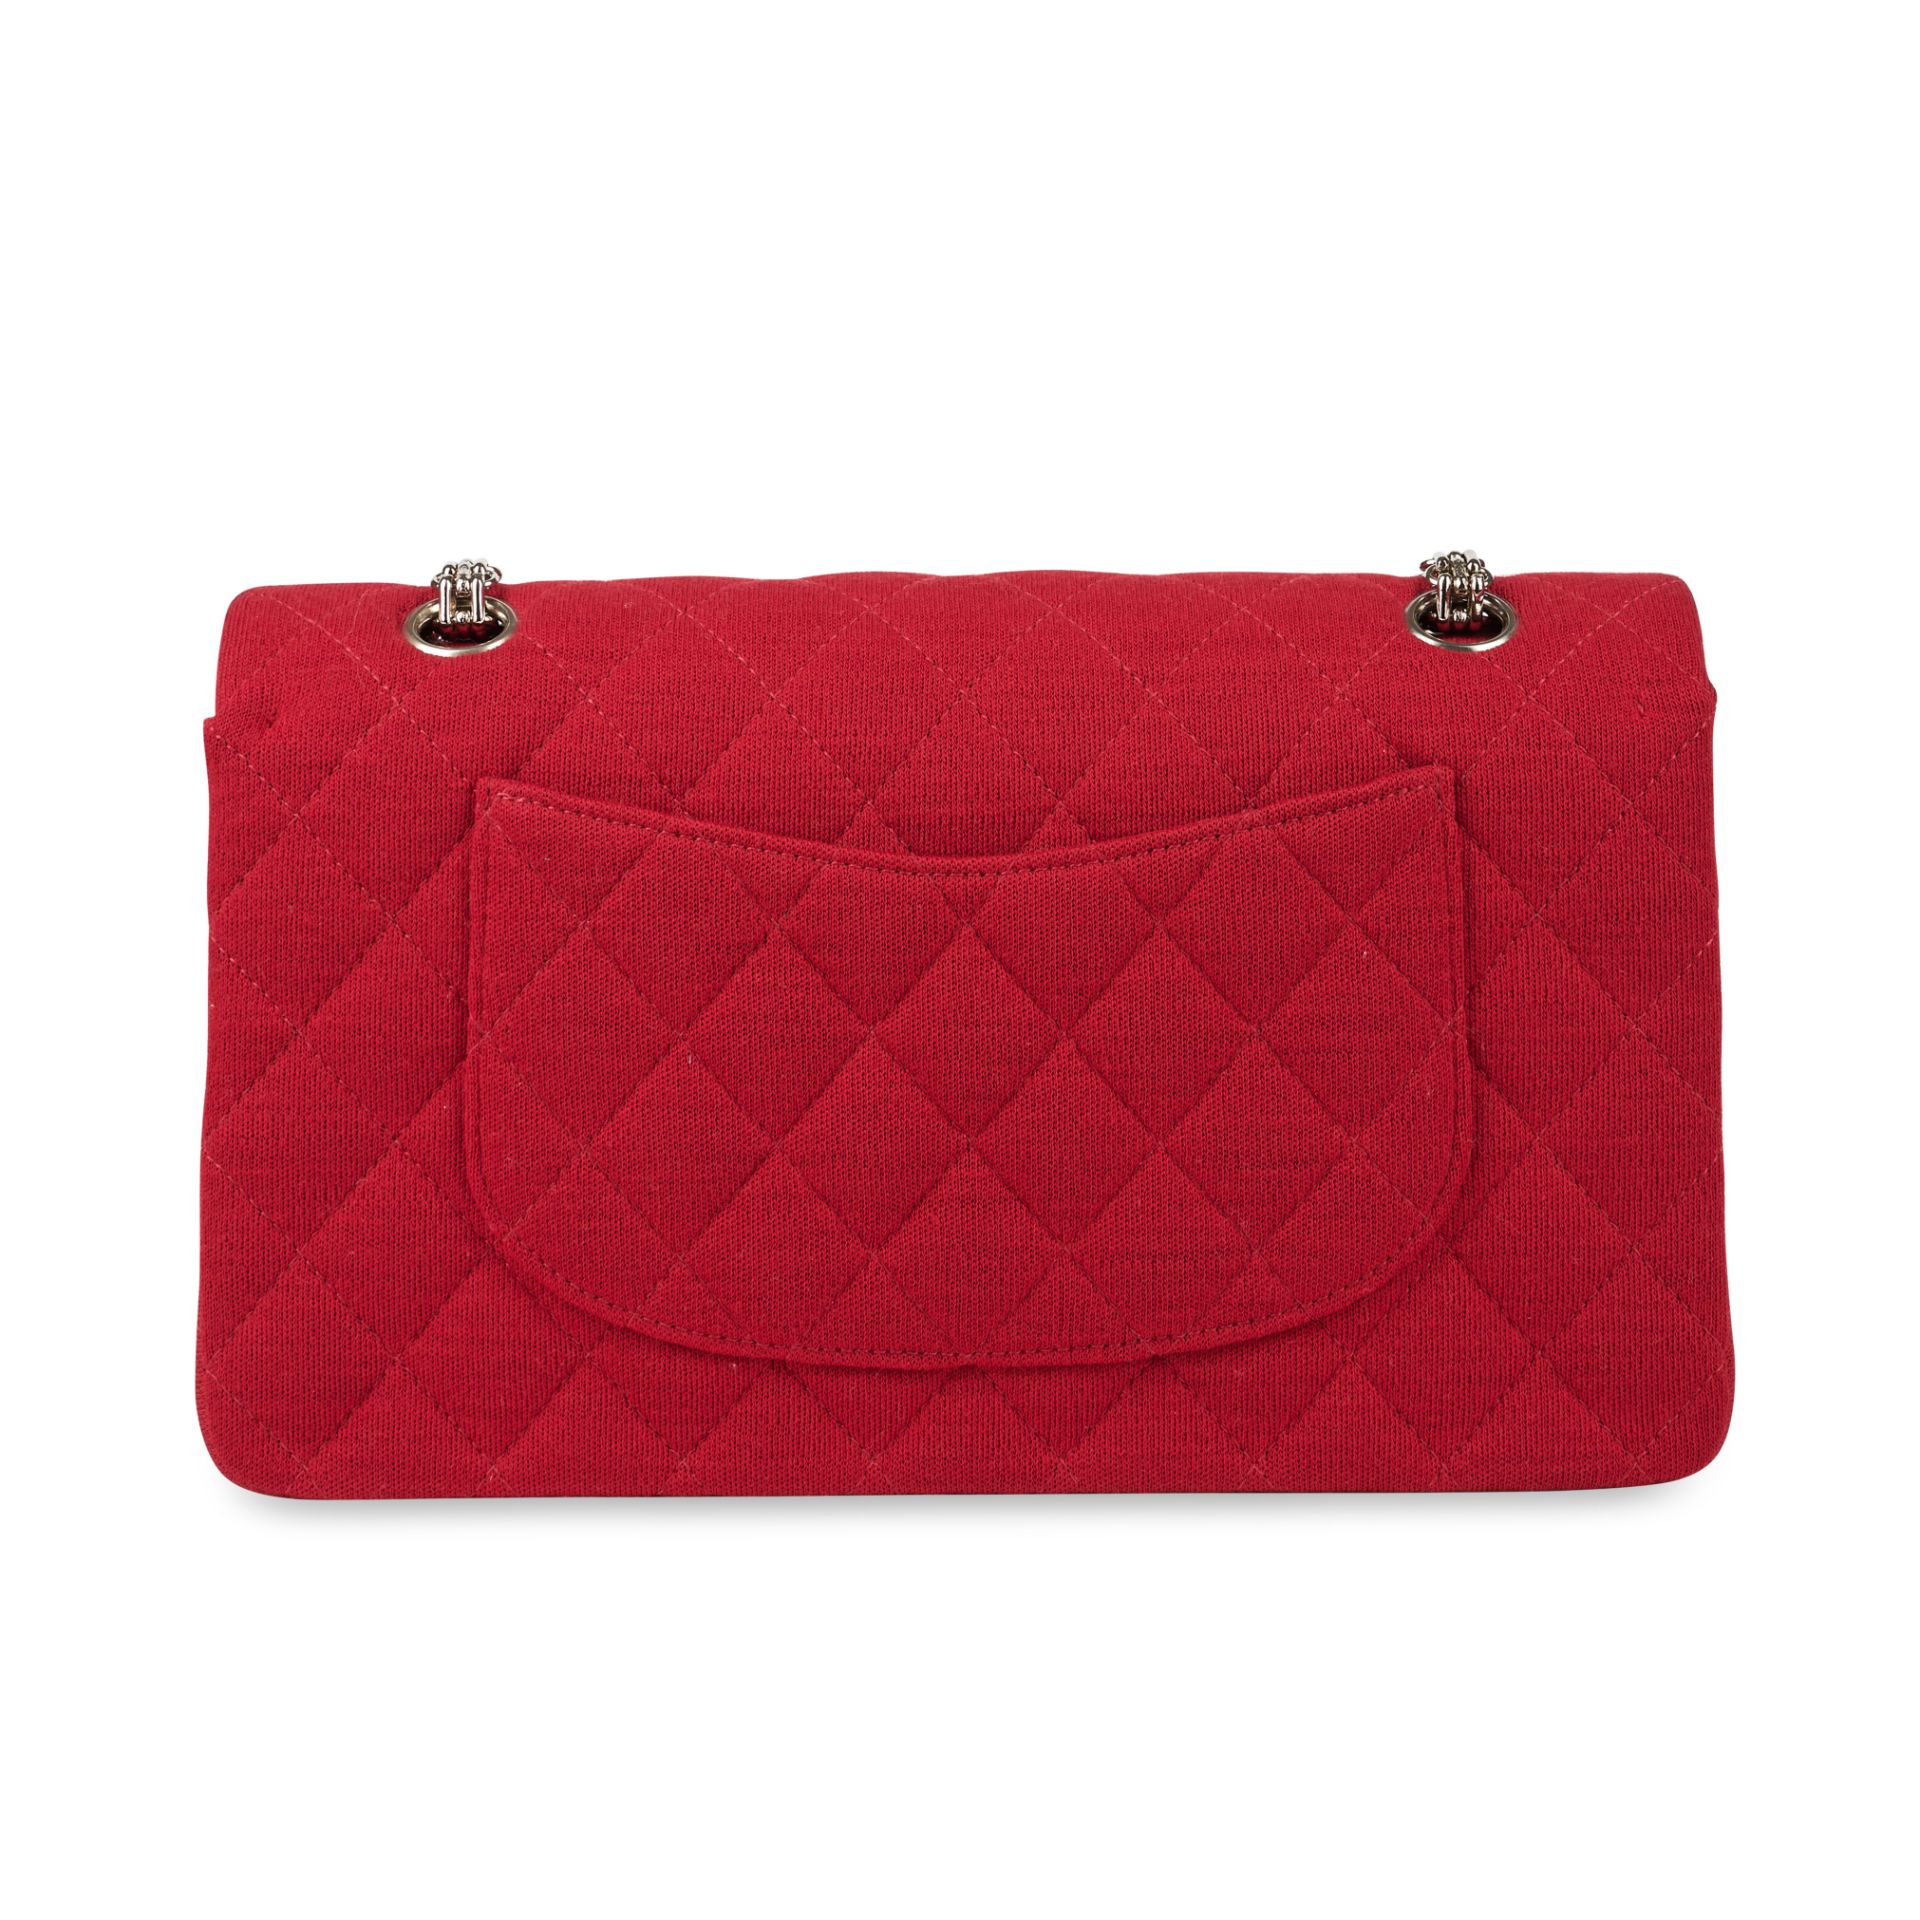 CHANEL RED FABRIC MEDIUM CLASSIC FLAP BAG Condition grade A-. Produced in 2005. 25cm long, 16cm... - Image 3 of 6